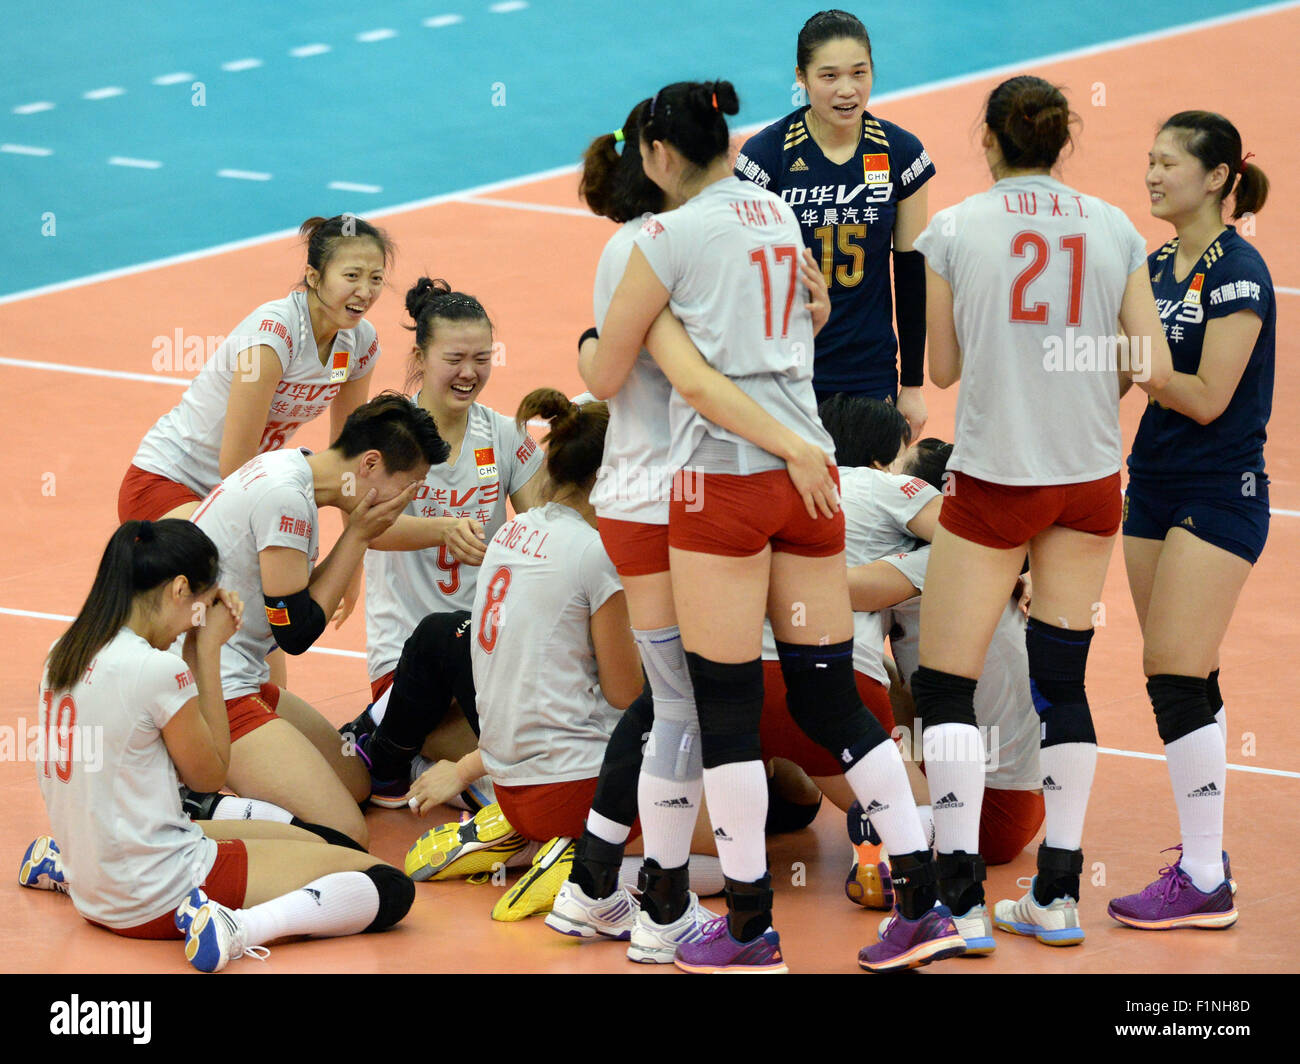 Nagoya, Japan. 5th Sep, 2015. Players of China celebrate victory after the match of 2015 Women's Volleyball World Cup against Russia in Nagoya, Japan, Sept. 5, 2015. China won 3-1. © Ma Ping/Xinhua/Alamy Live News Stock Photo